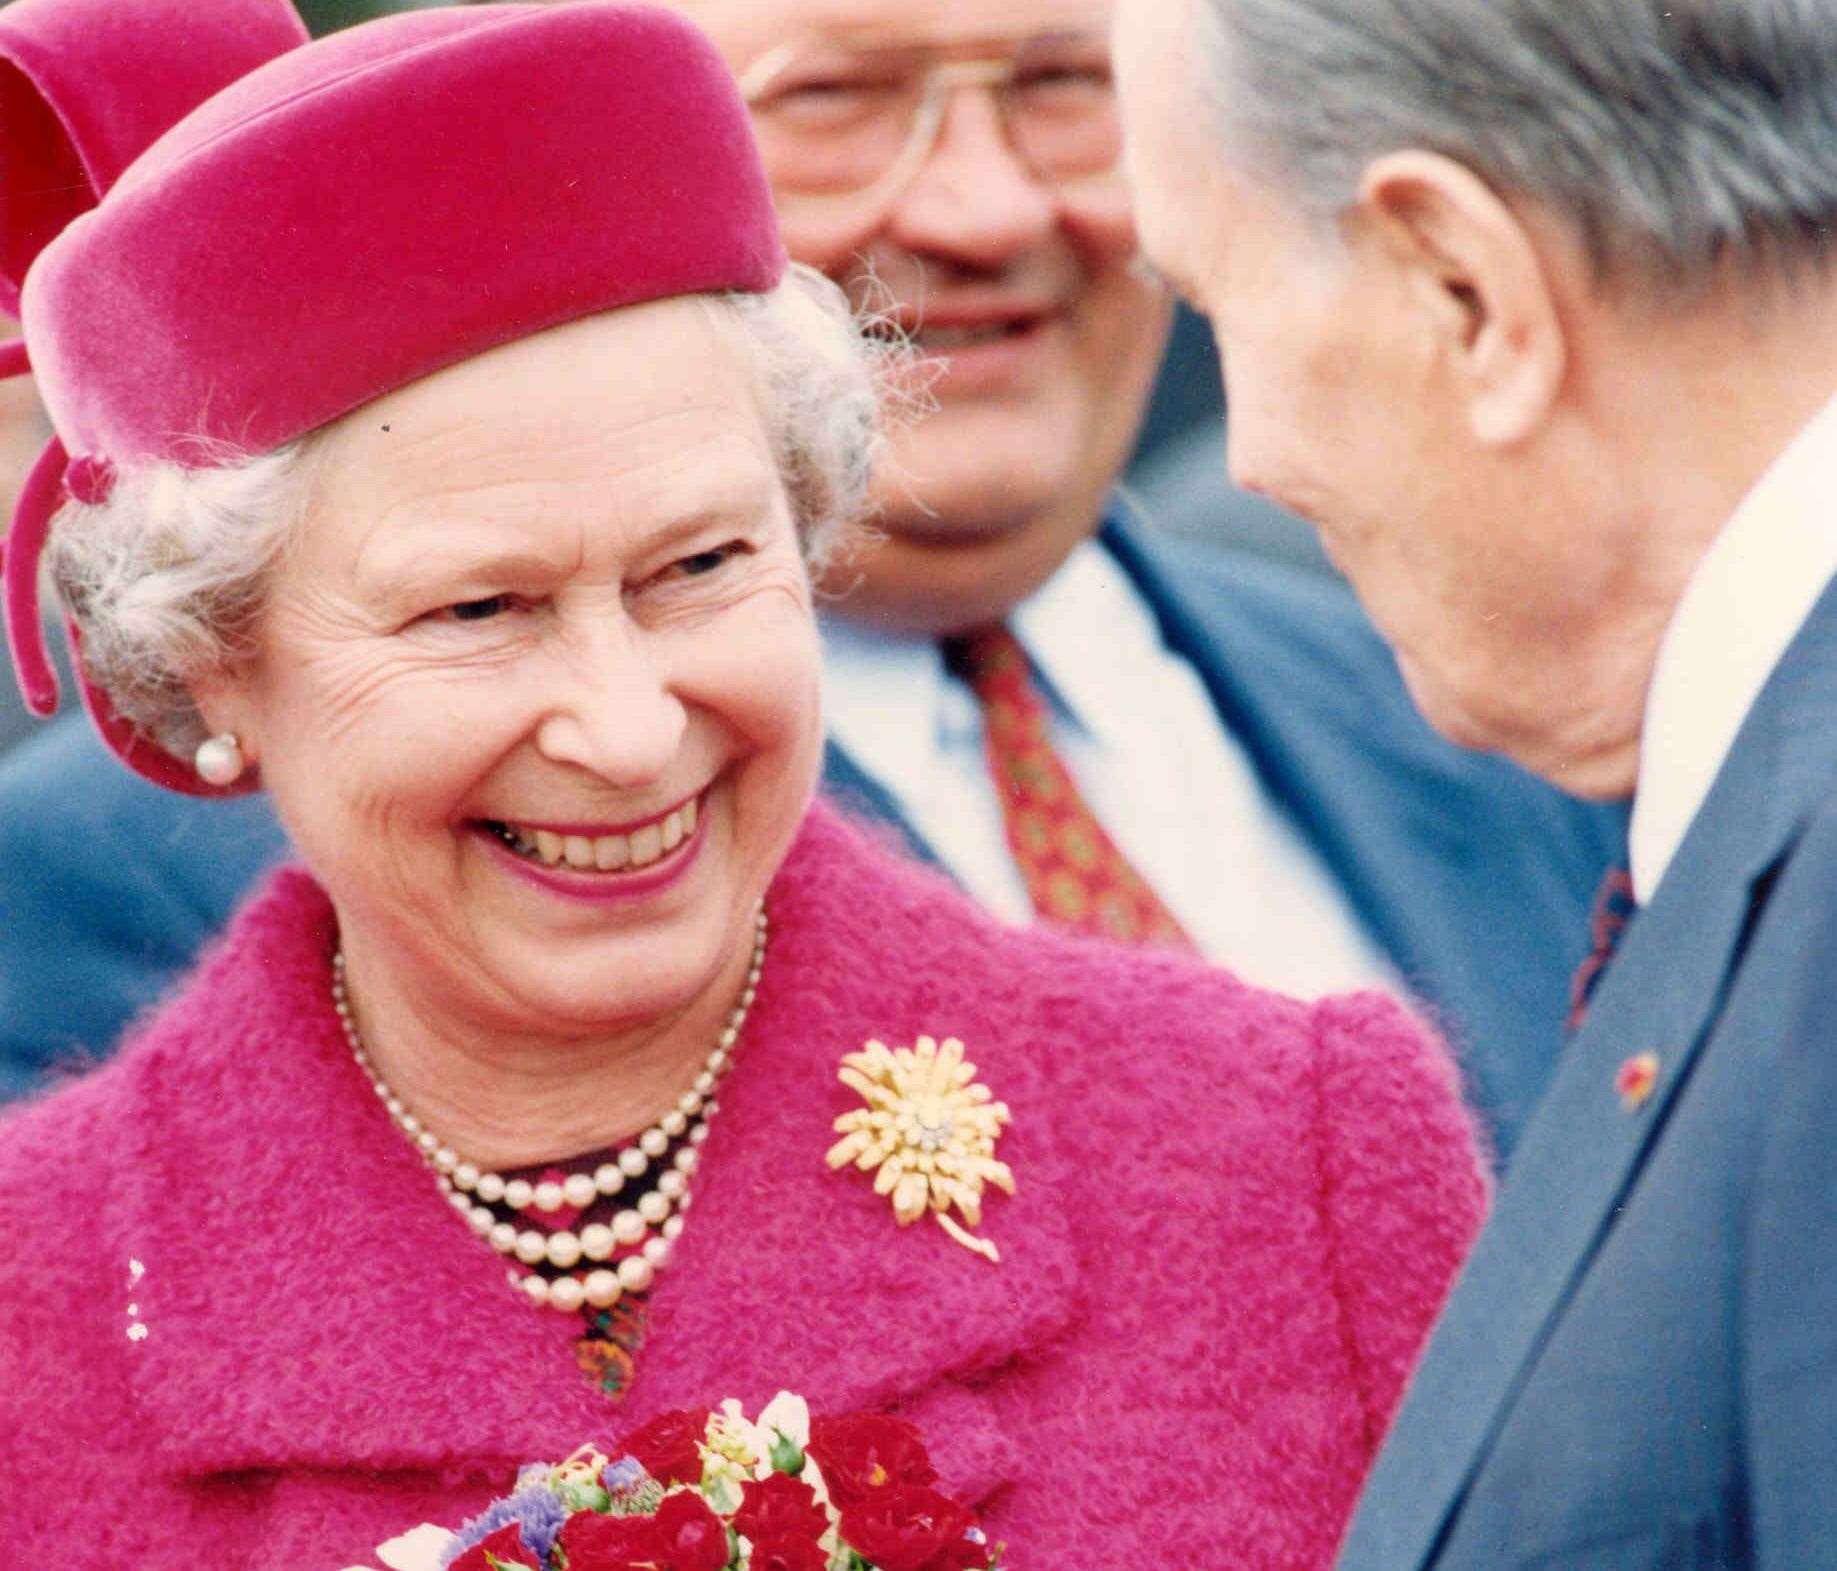 The Queen, in 1994, boarded a Eurostar train and travelled through the Channel Tunnel to meet French President Francois Mitterand in Calais for the first of two official opening ceremonies